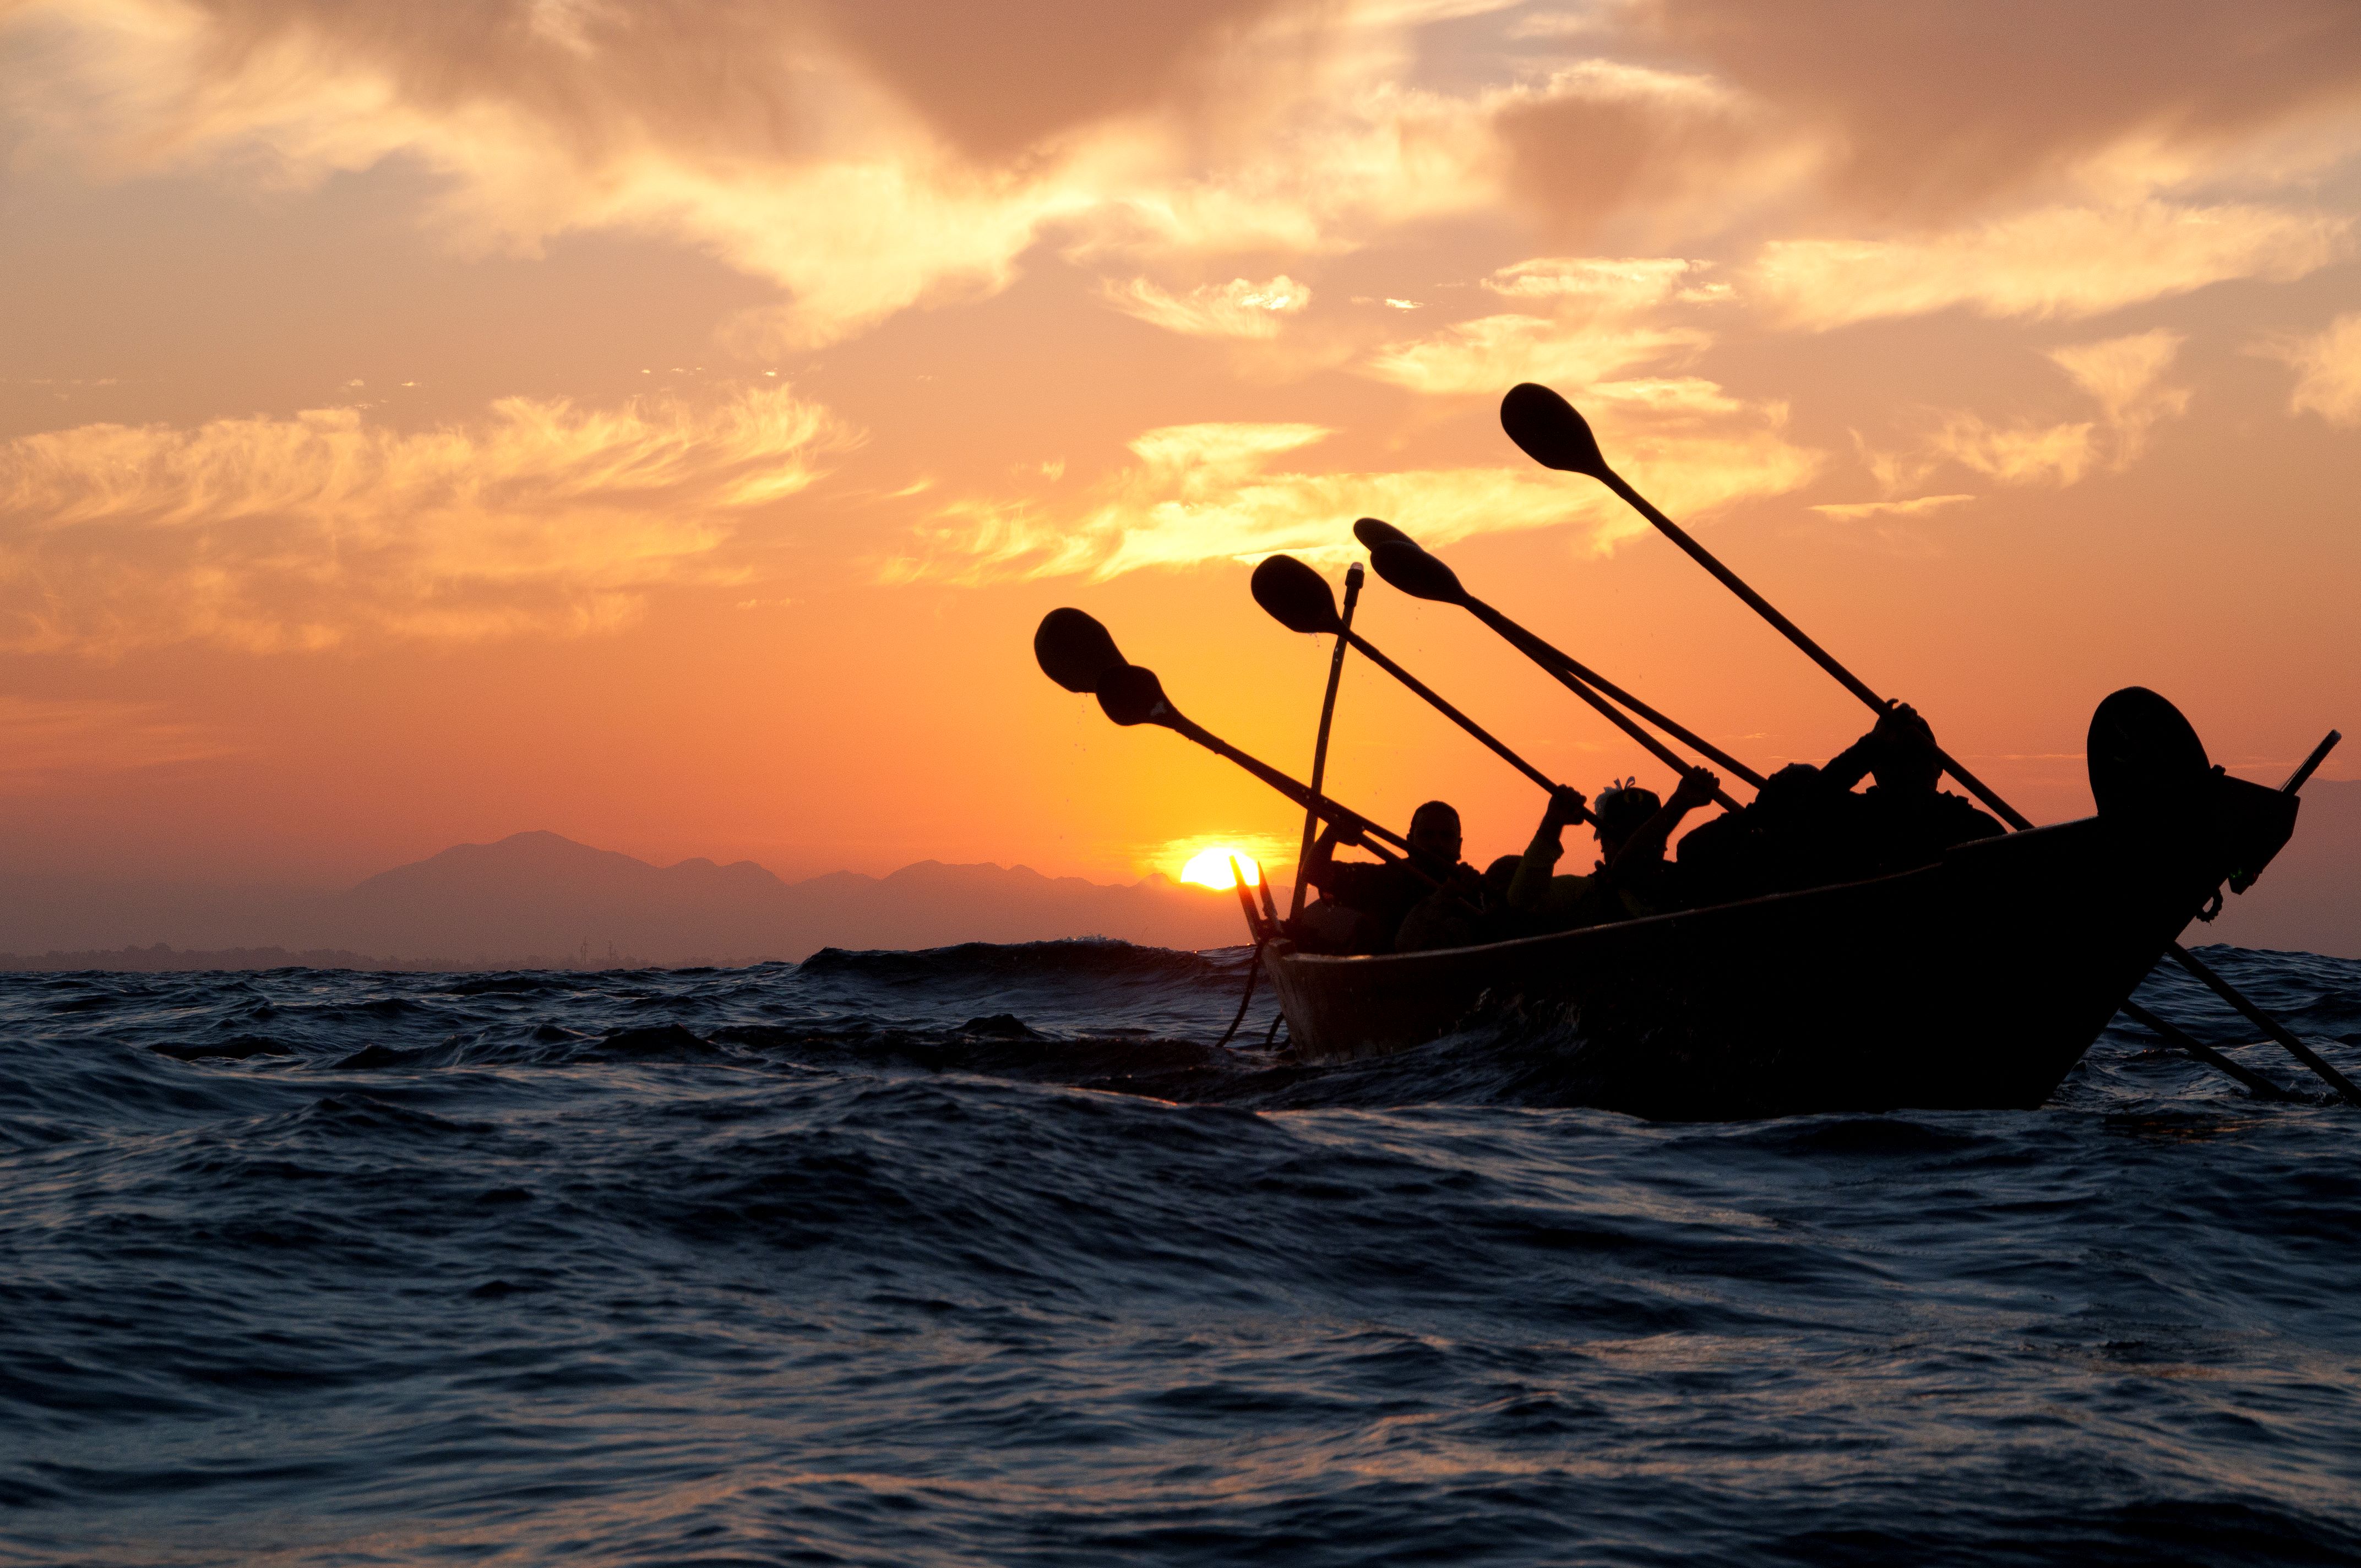 Paddlers in a canoe on the ocean at sunset.